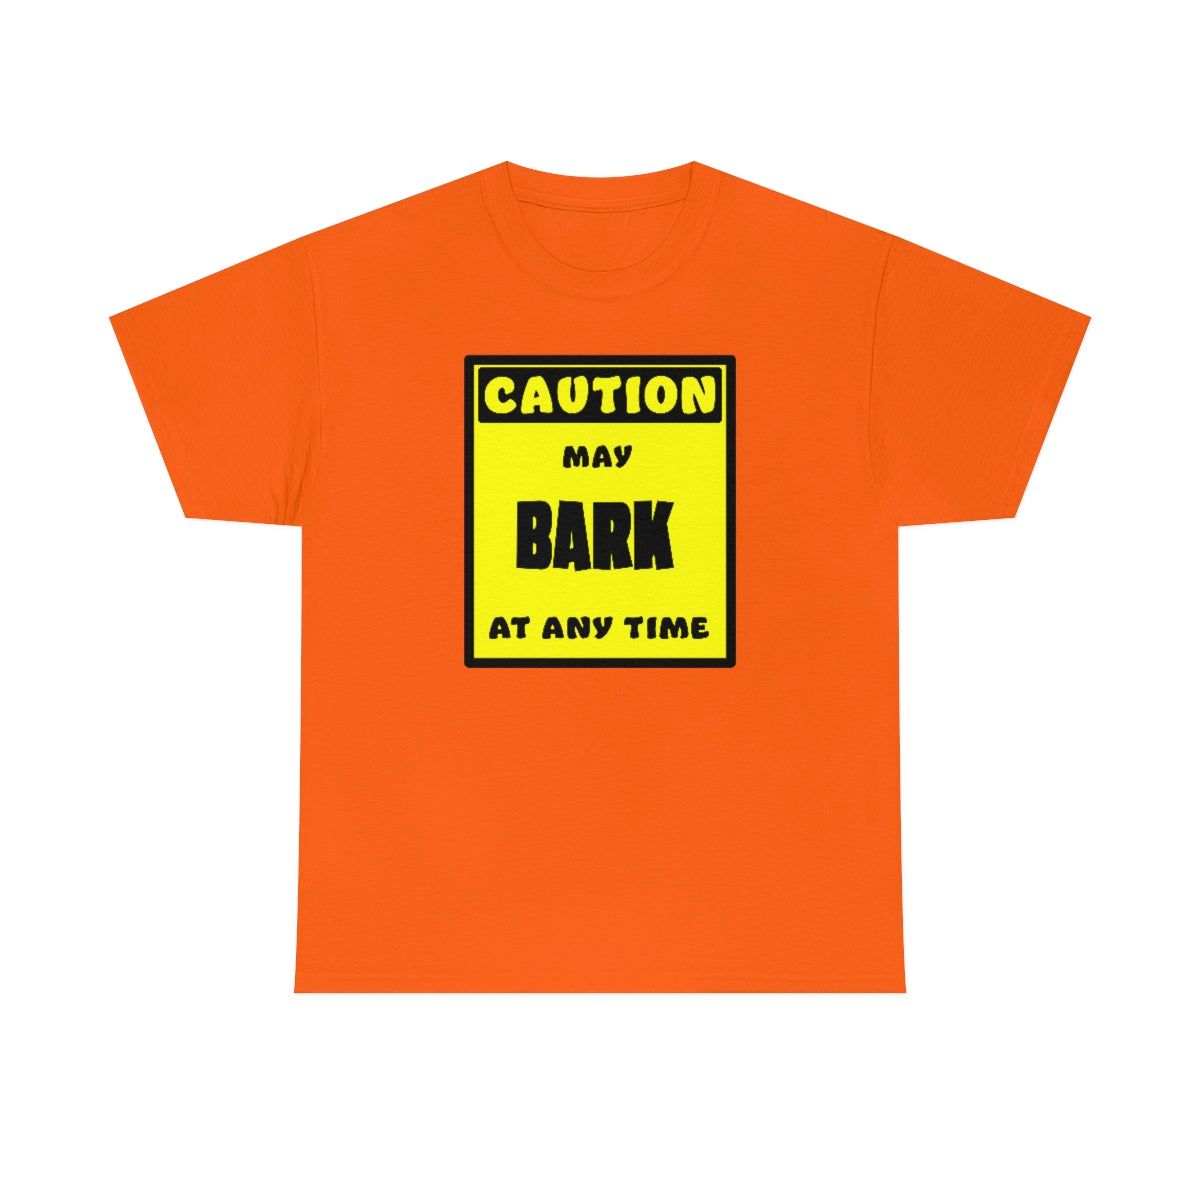 CAUTION! May BARK at any time! - T-Shirt T-Shirt AFLT-Whootorca Orange S 